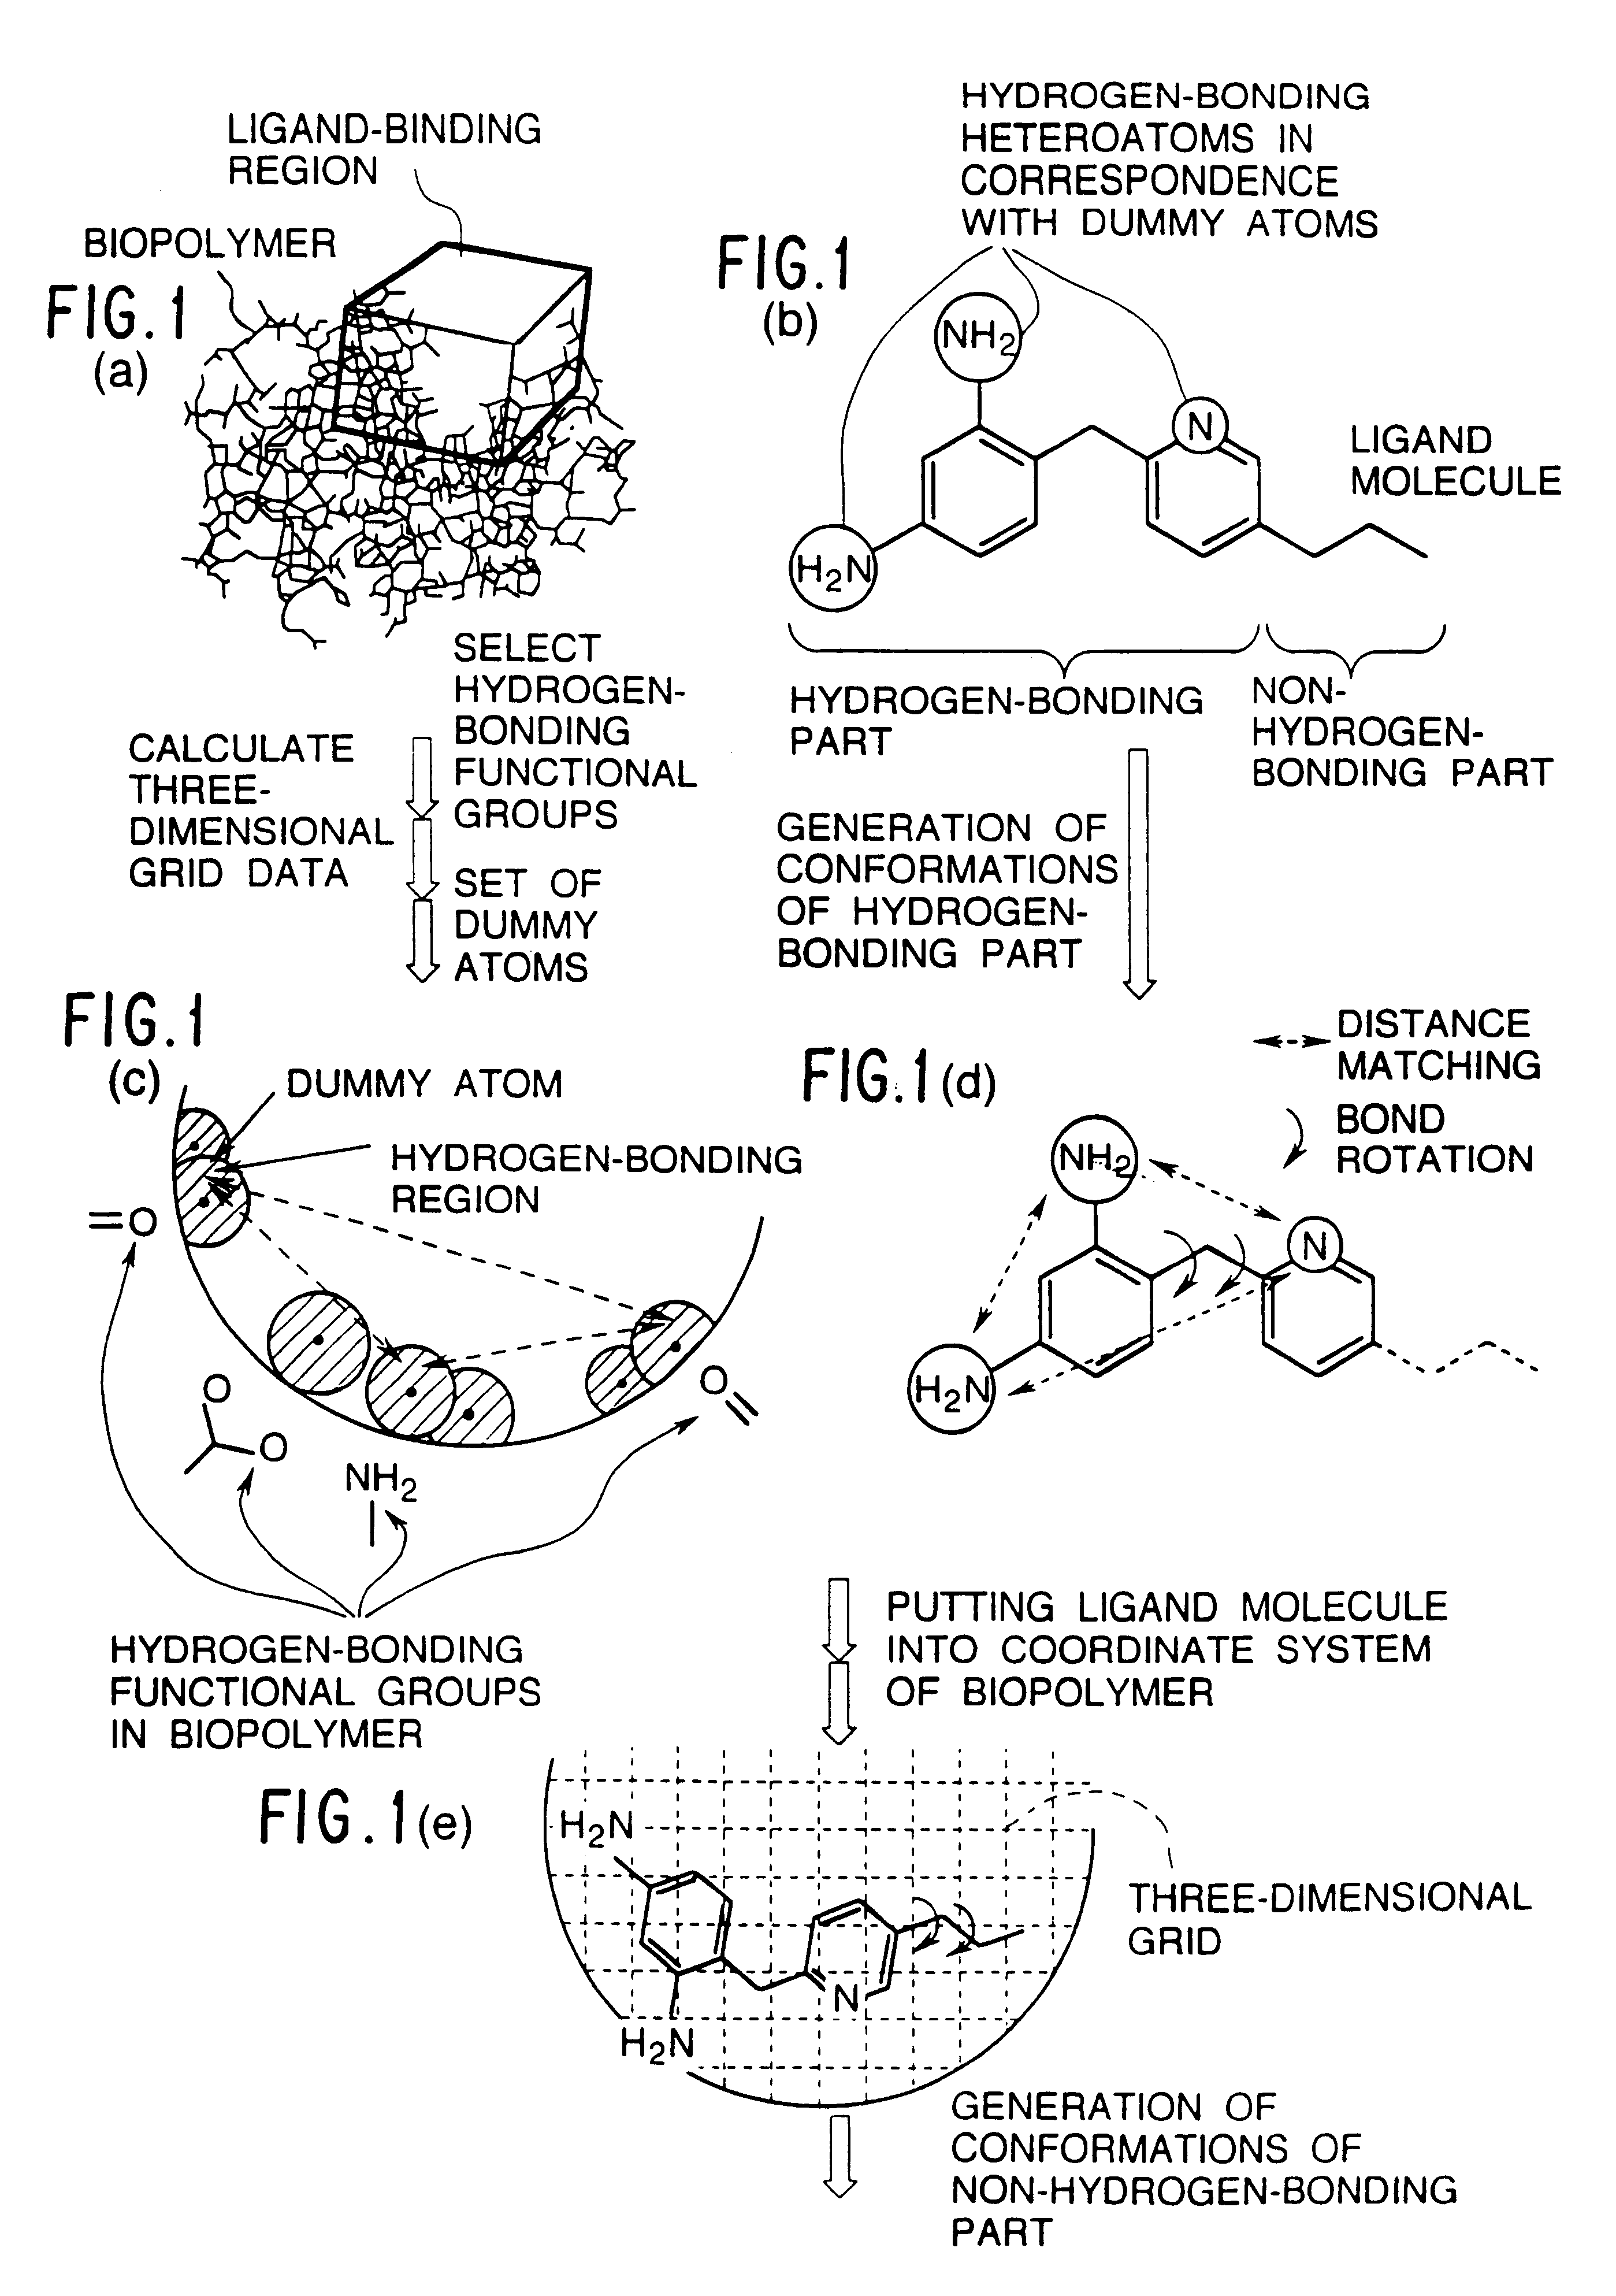 Methods for searching stable docking models of biopolymer-ligand molecule complex